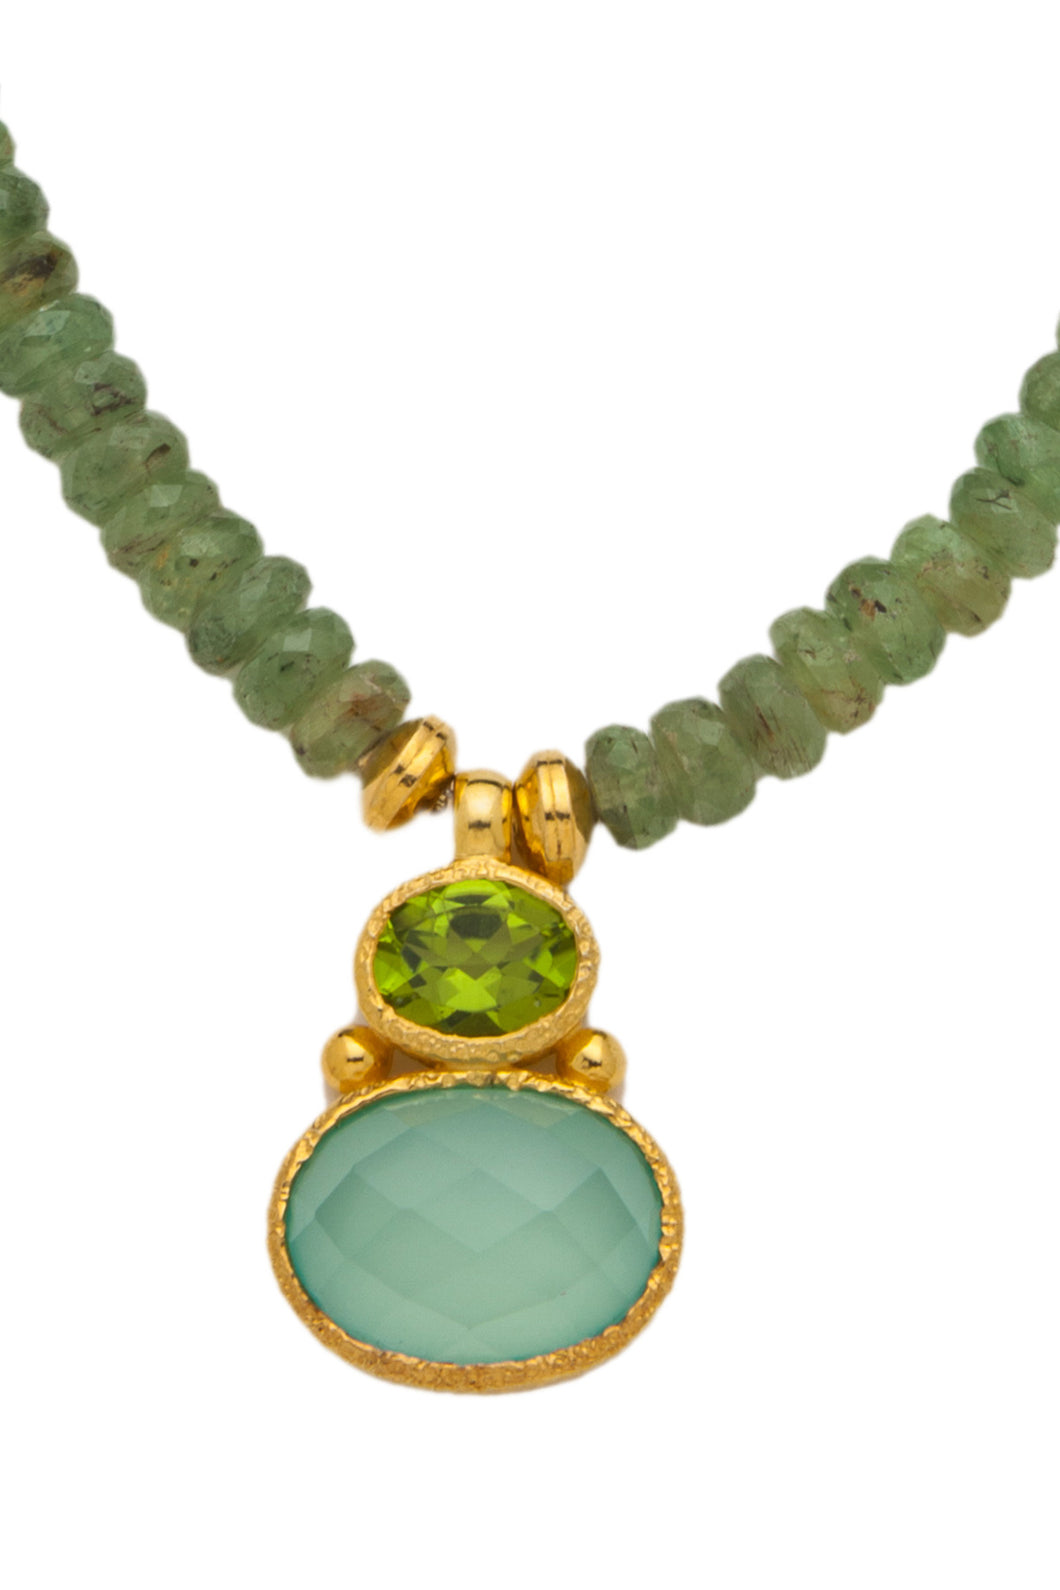 Green Kyanite Necklace with a Peridot and Chalcedony Pendant in 24kt gold vermeil NF003-GK